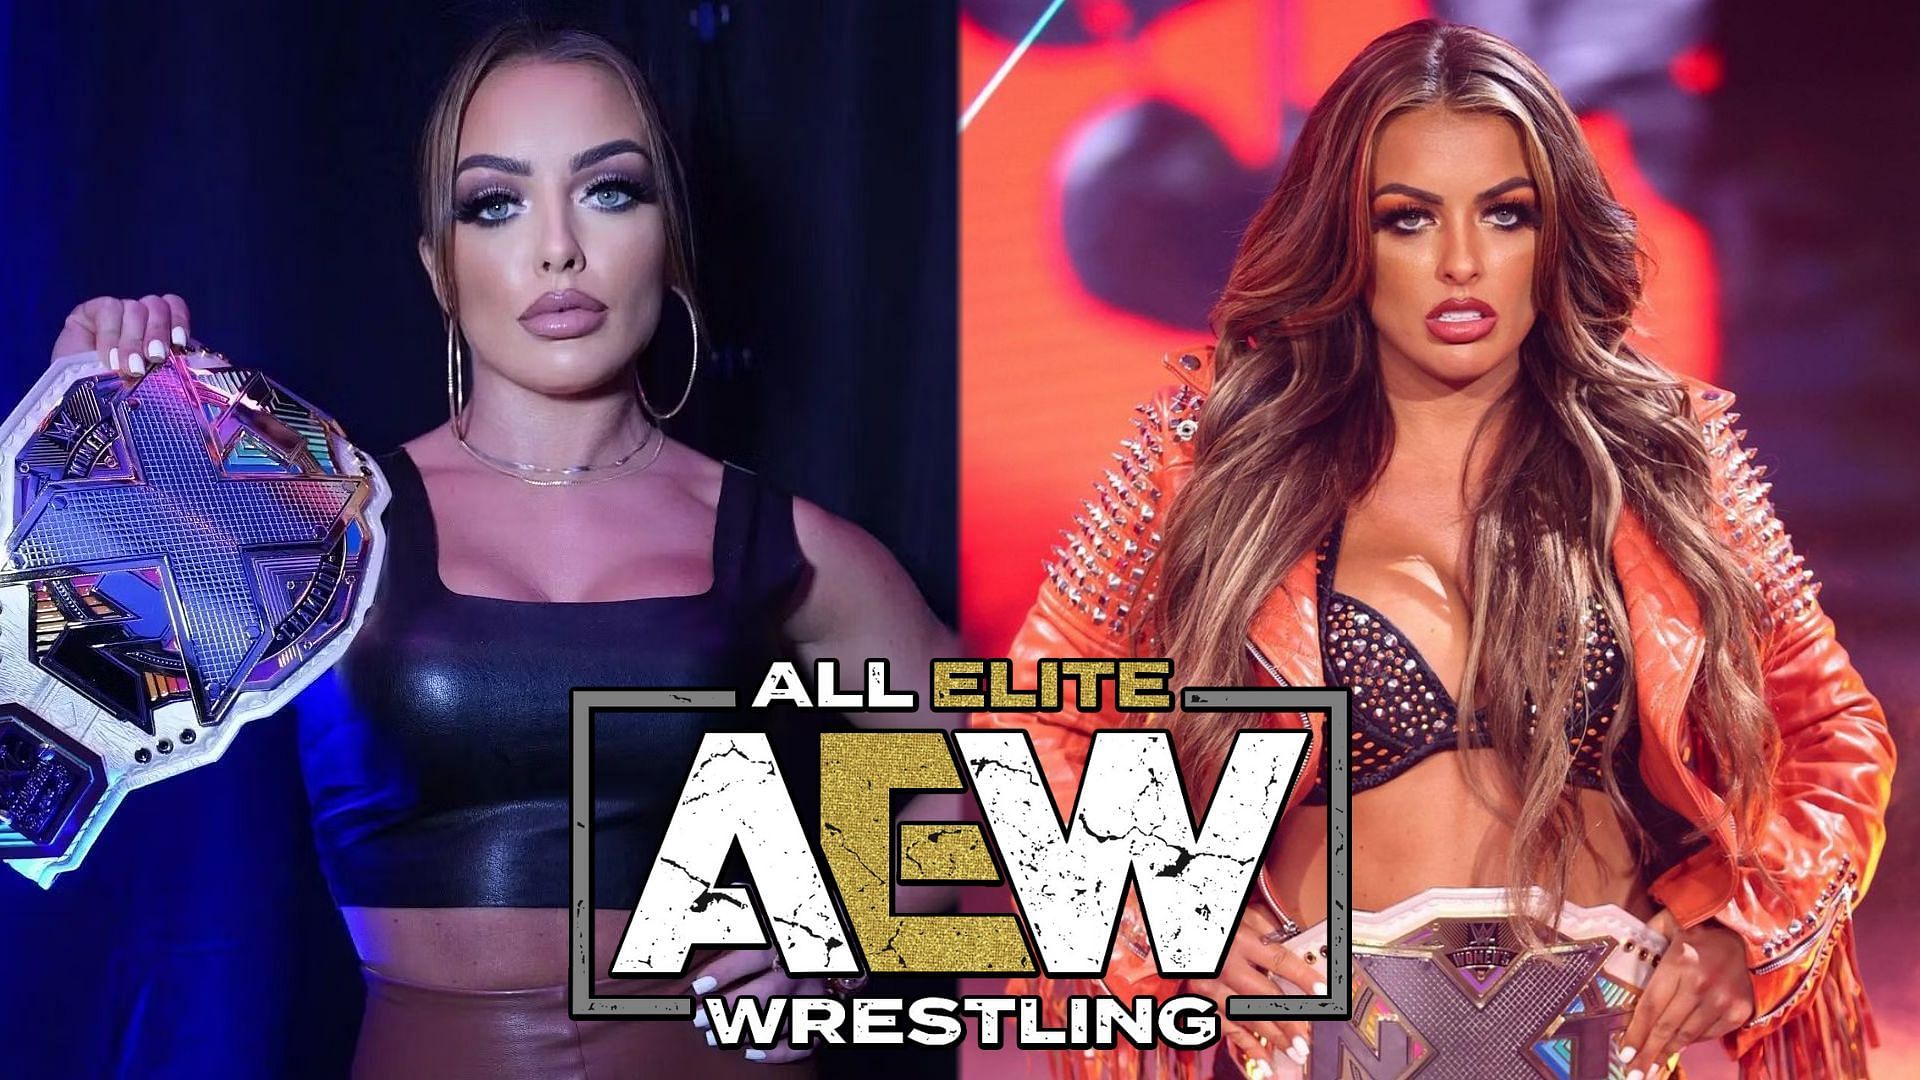 Did Mandy Rose have ties to AEW before her WWE release?